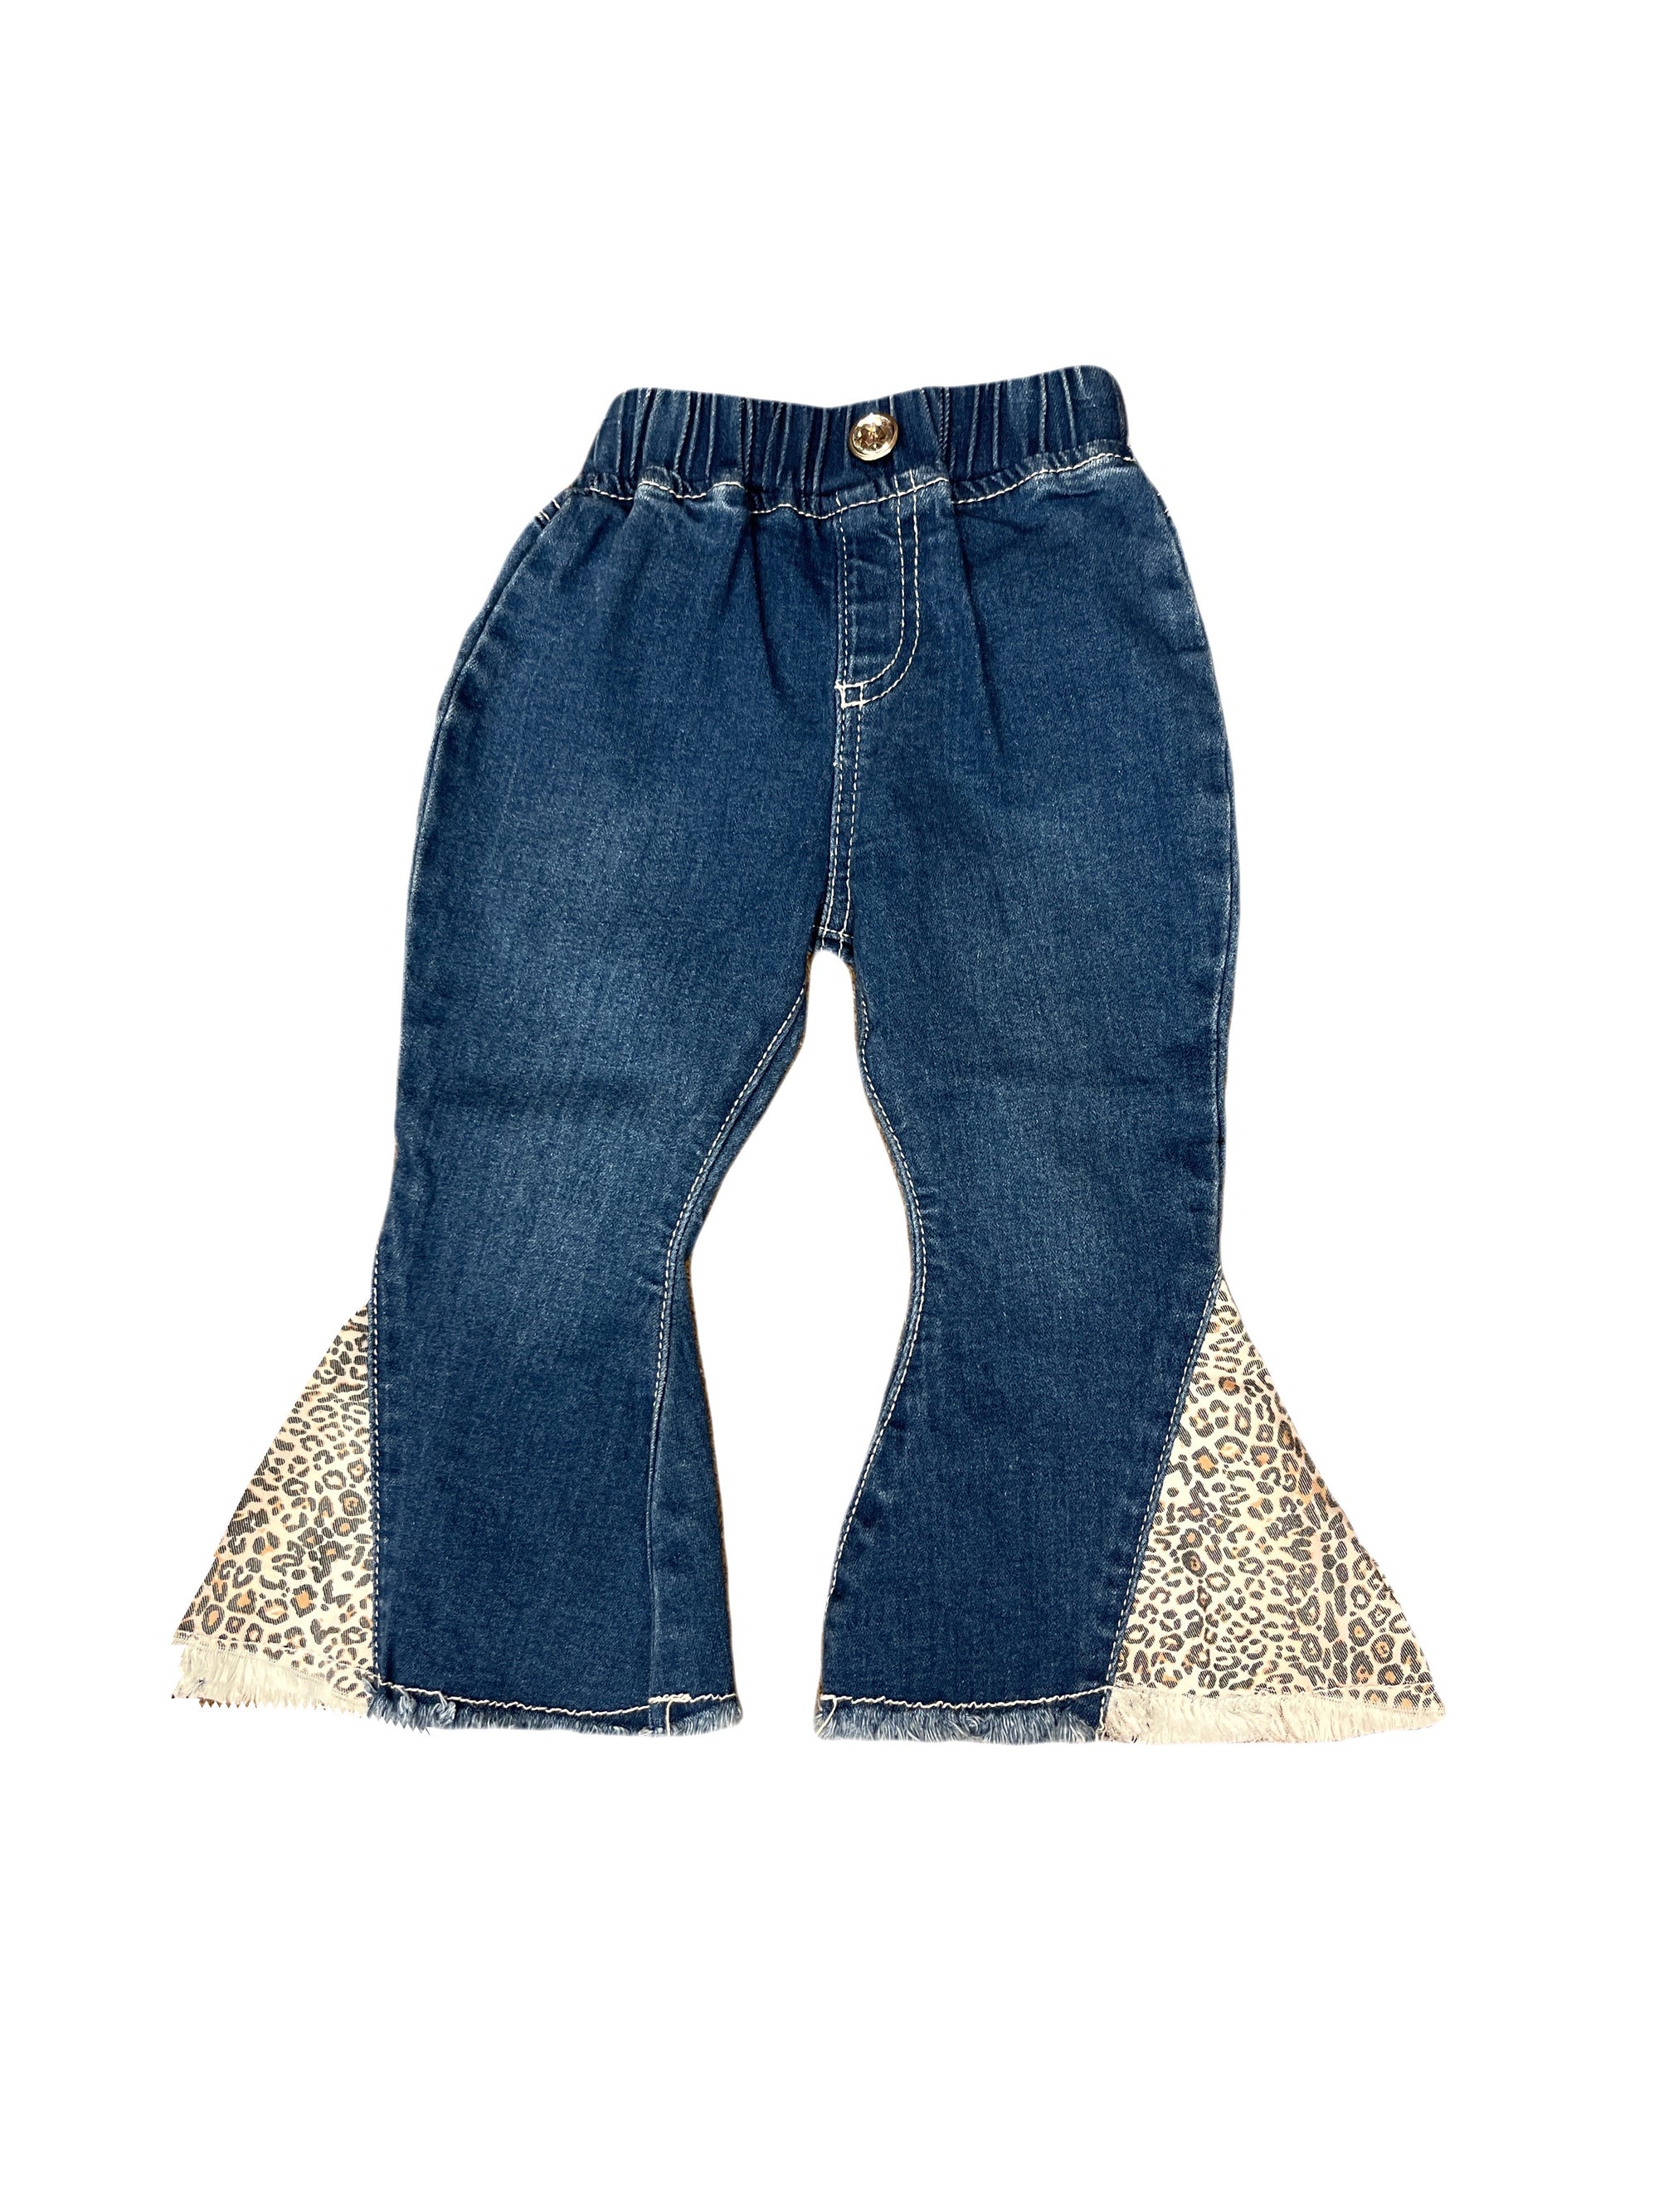 Cowgirl Hardware Toddler Girl's Jean STYLE 802109-450